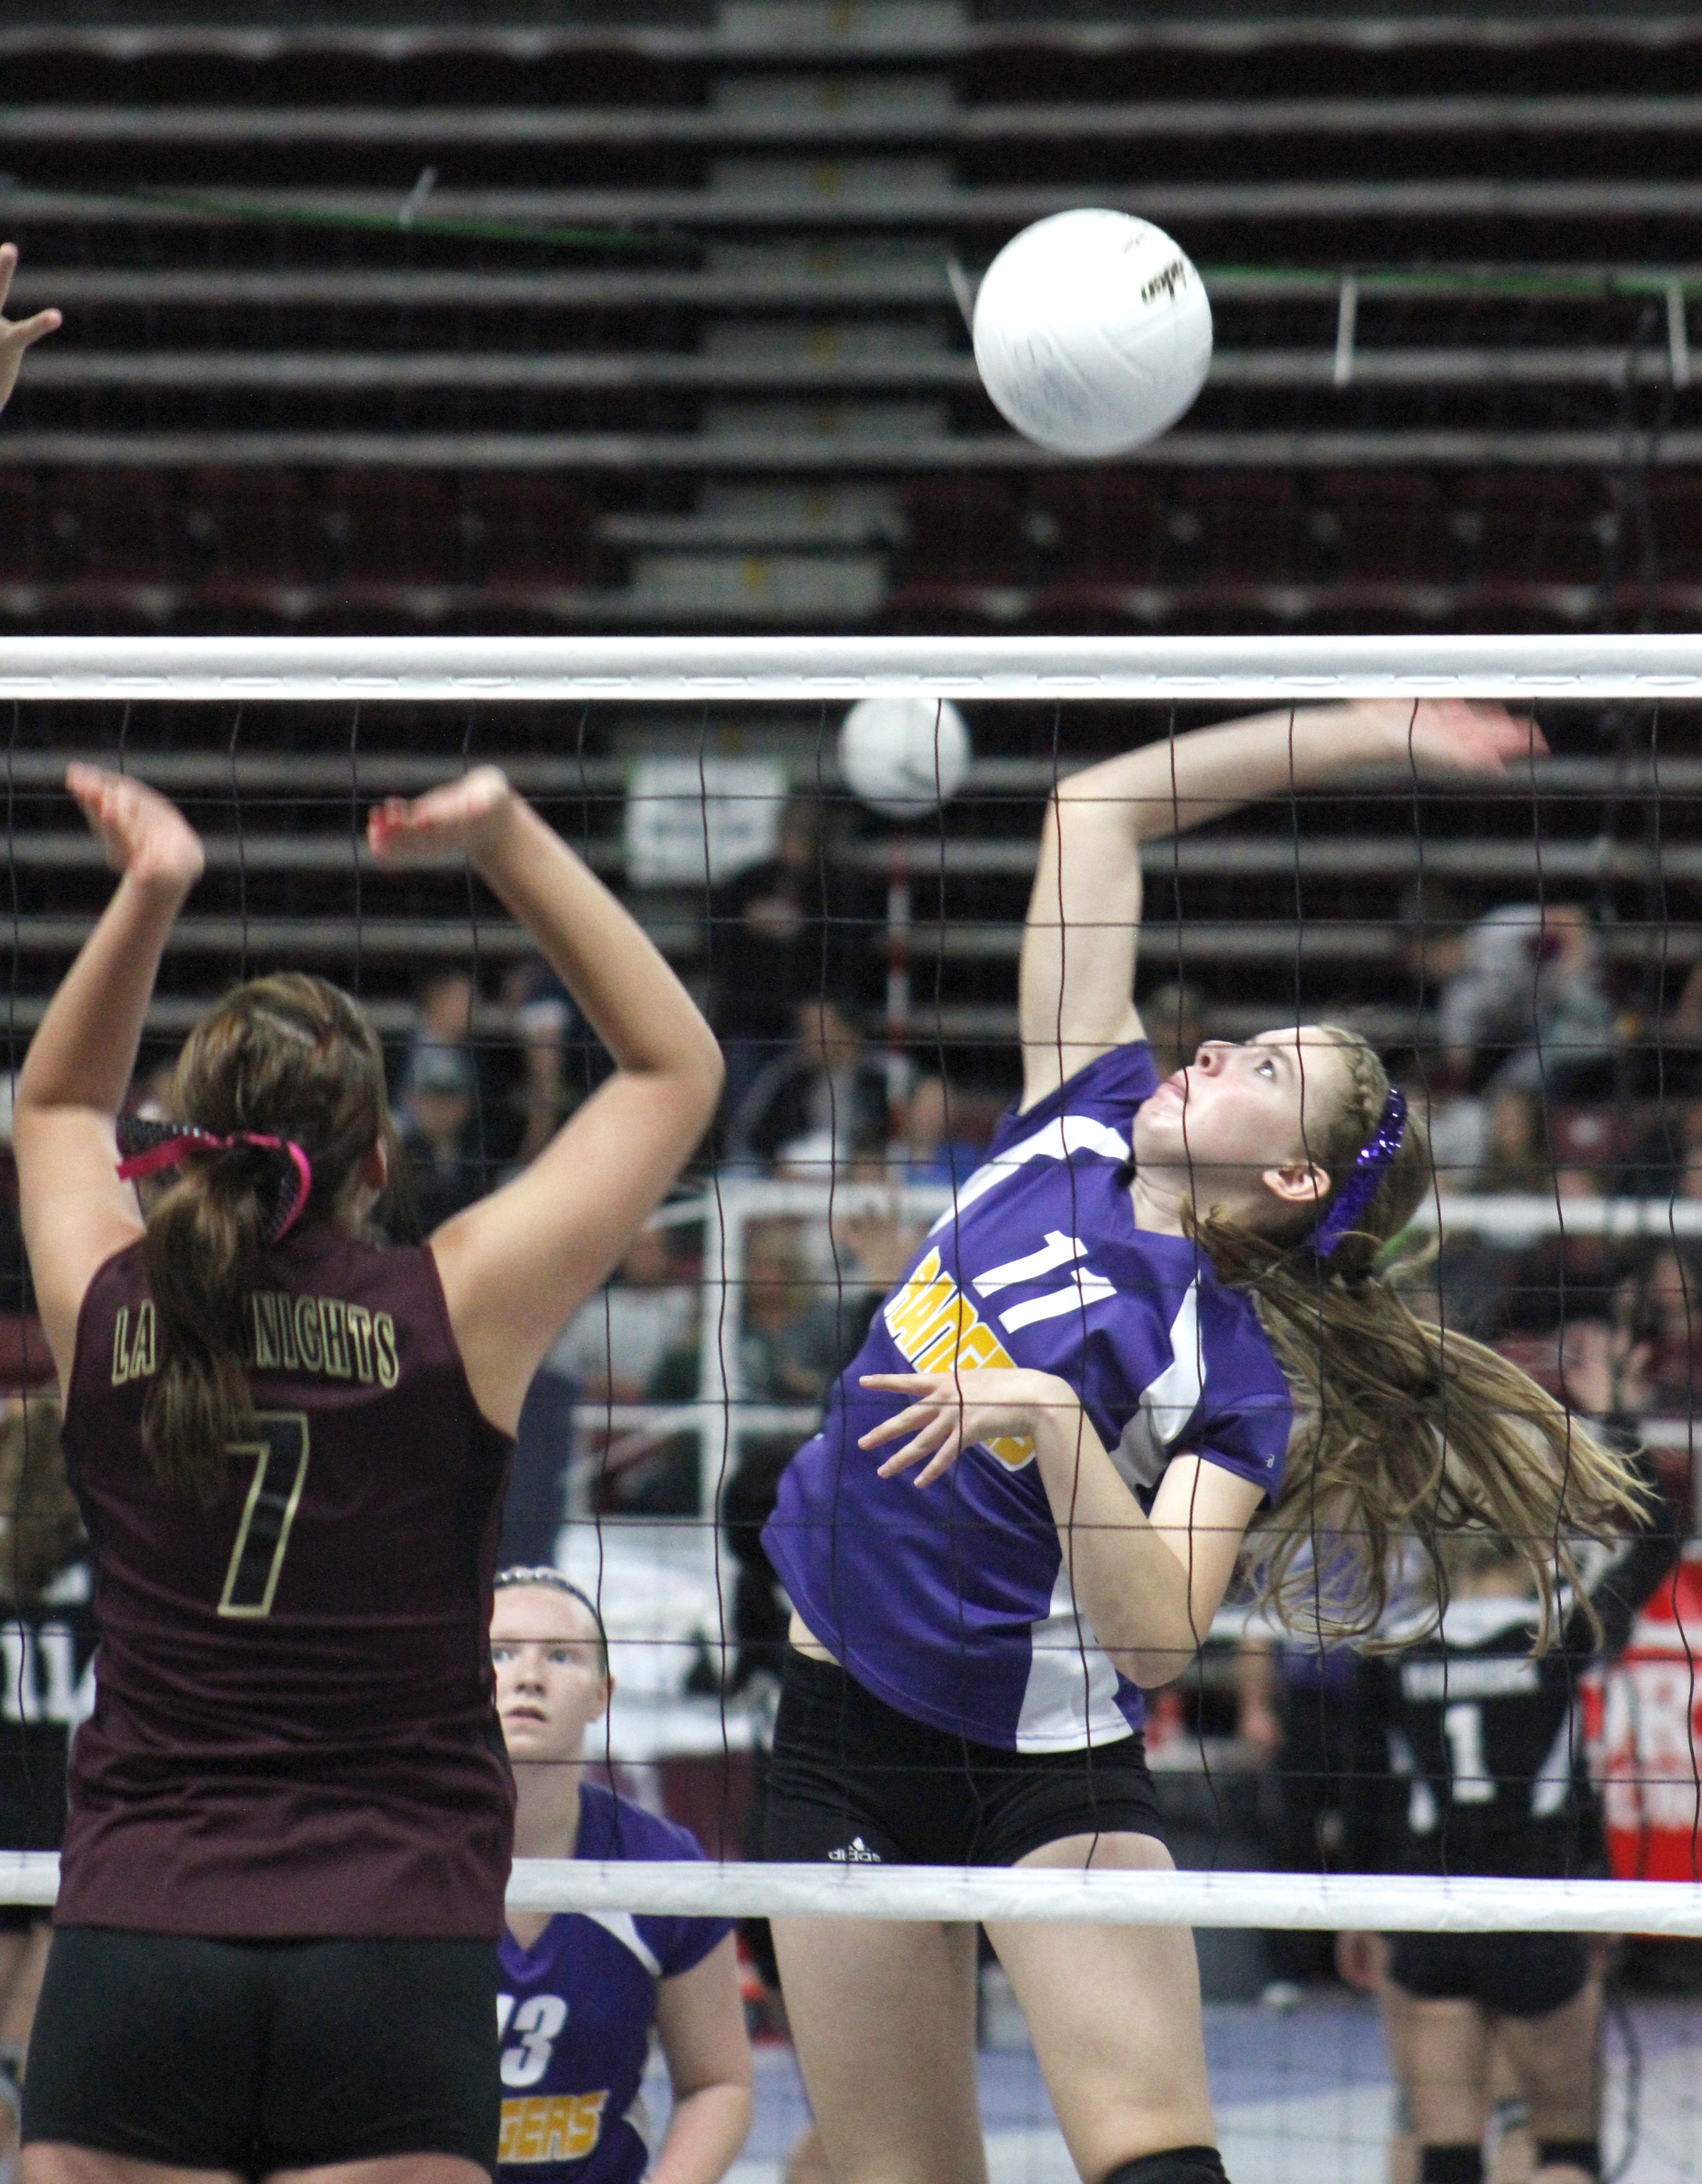 Quilcene's Megan Weller attempts a spike against Sunnyside Christian's Mackenzie Benjert during last year's Class 1B state volleyball tournament in Yakima. Roger Harnack/The Omak-Okanogan County Chronicle